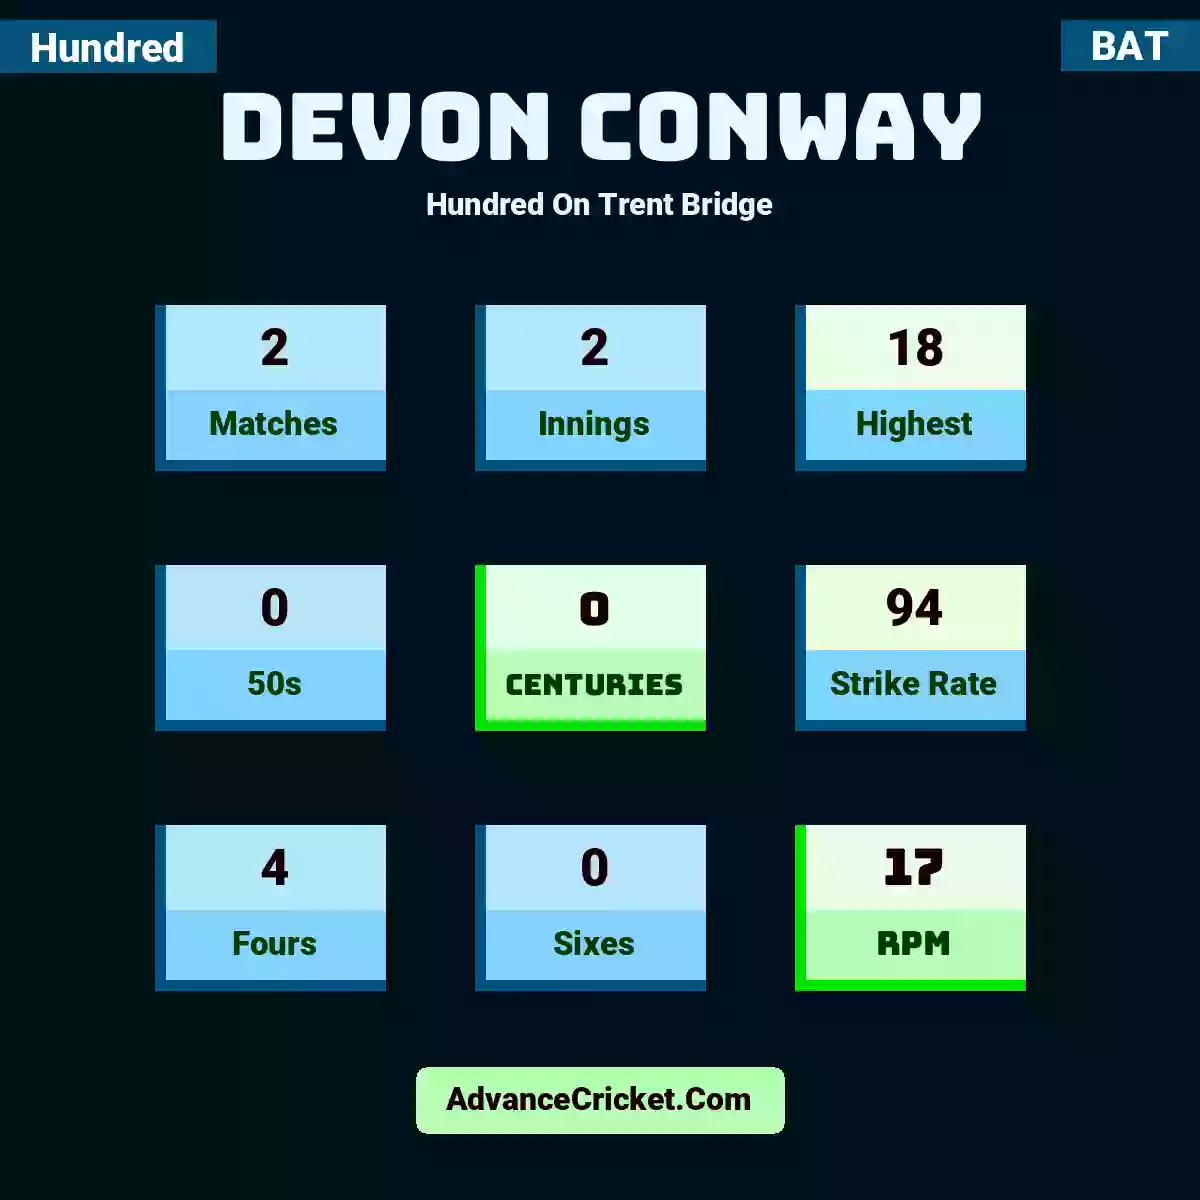 Devon Conway Hundred  On Trent Bridge, Devon Conway played 2 matches, scored 18 runs as highest, 0 half-centuries, and 0 centuries, with a strike rate of 94. D.Conway hit 4 fours and 0 sixes, with an RPM of 17.